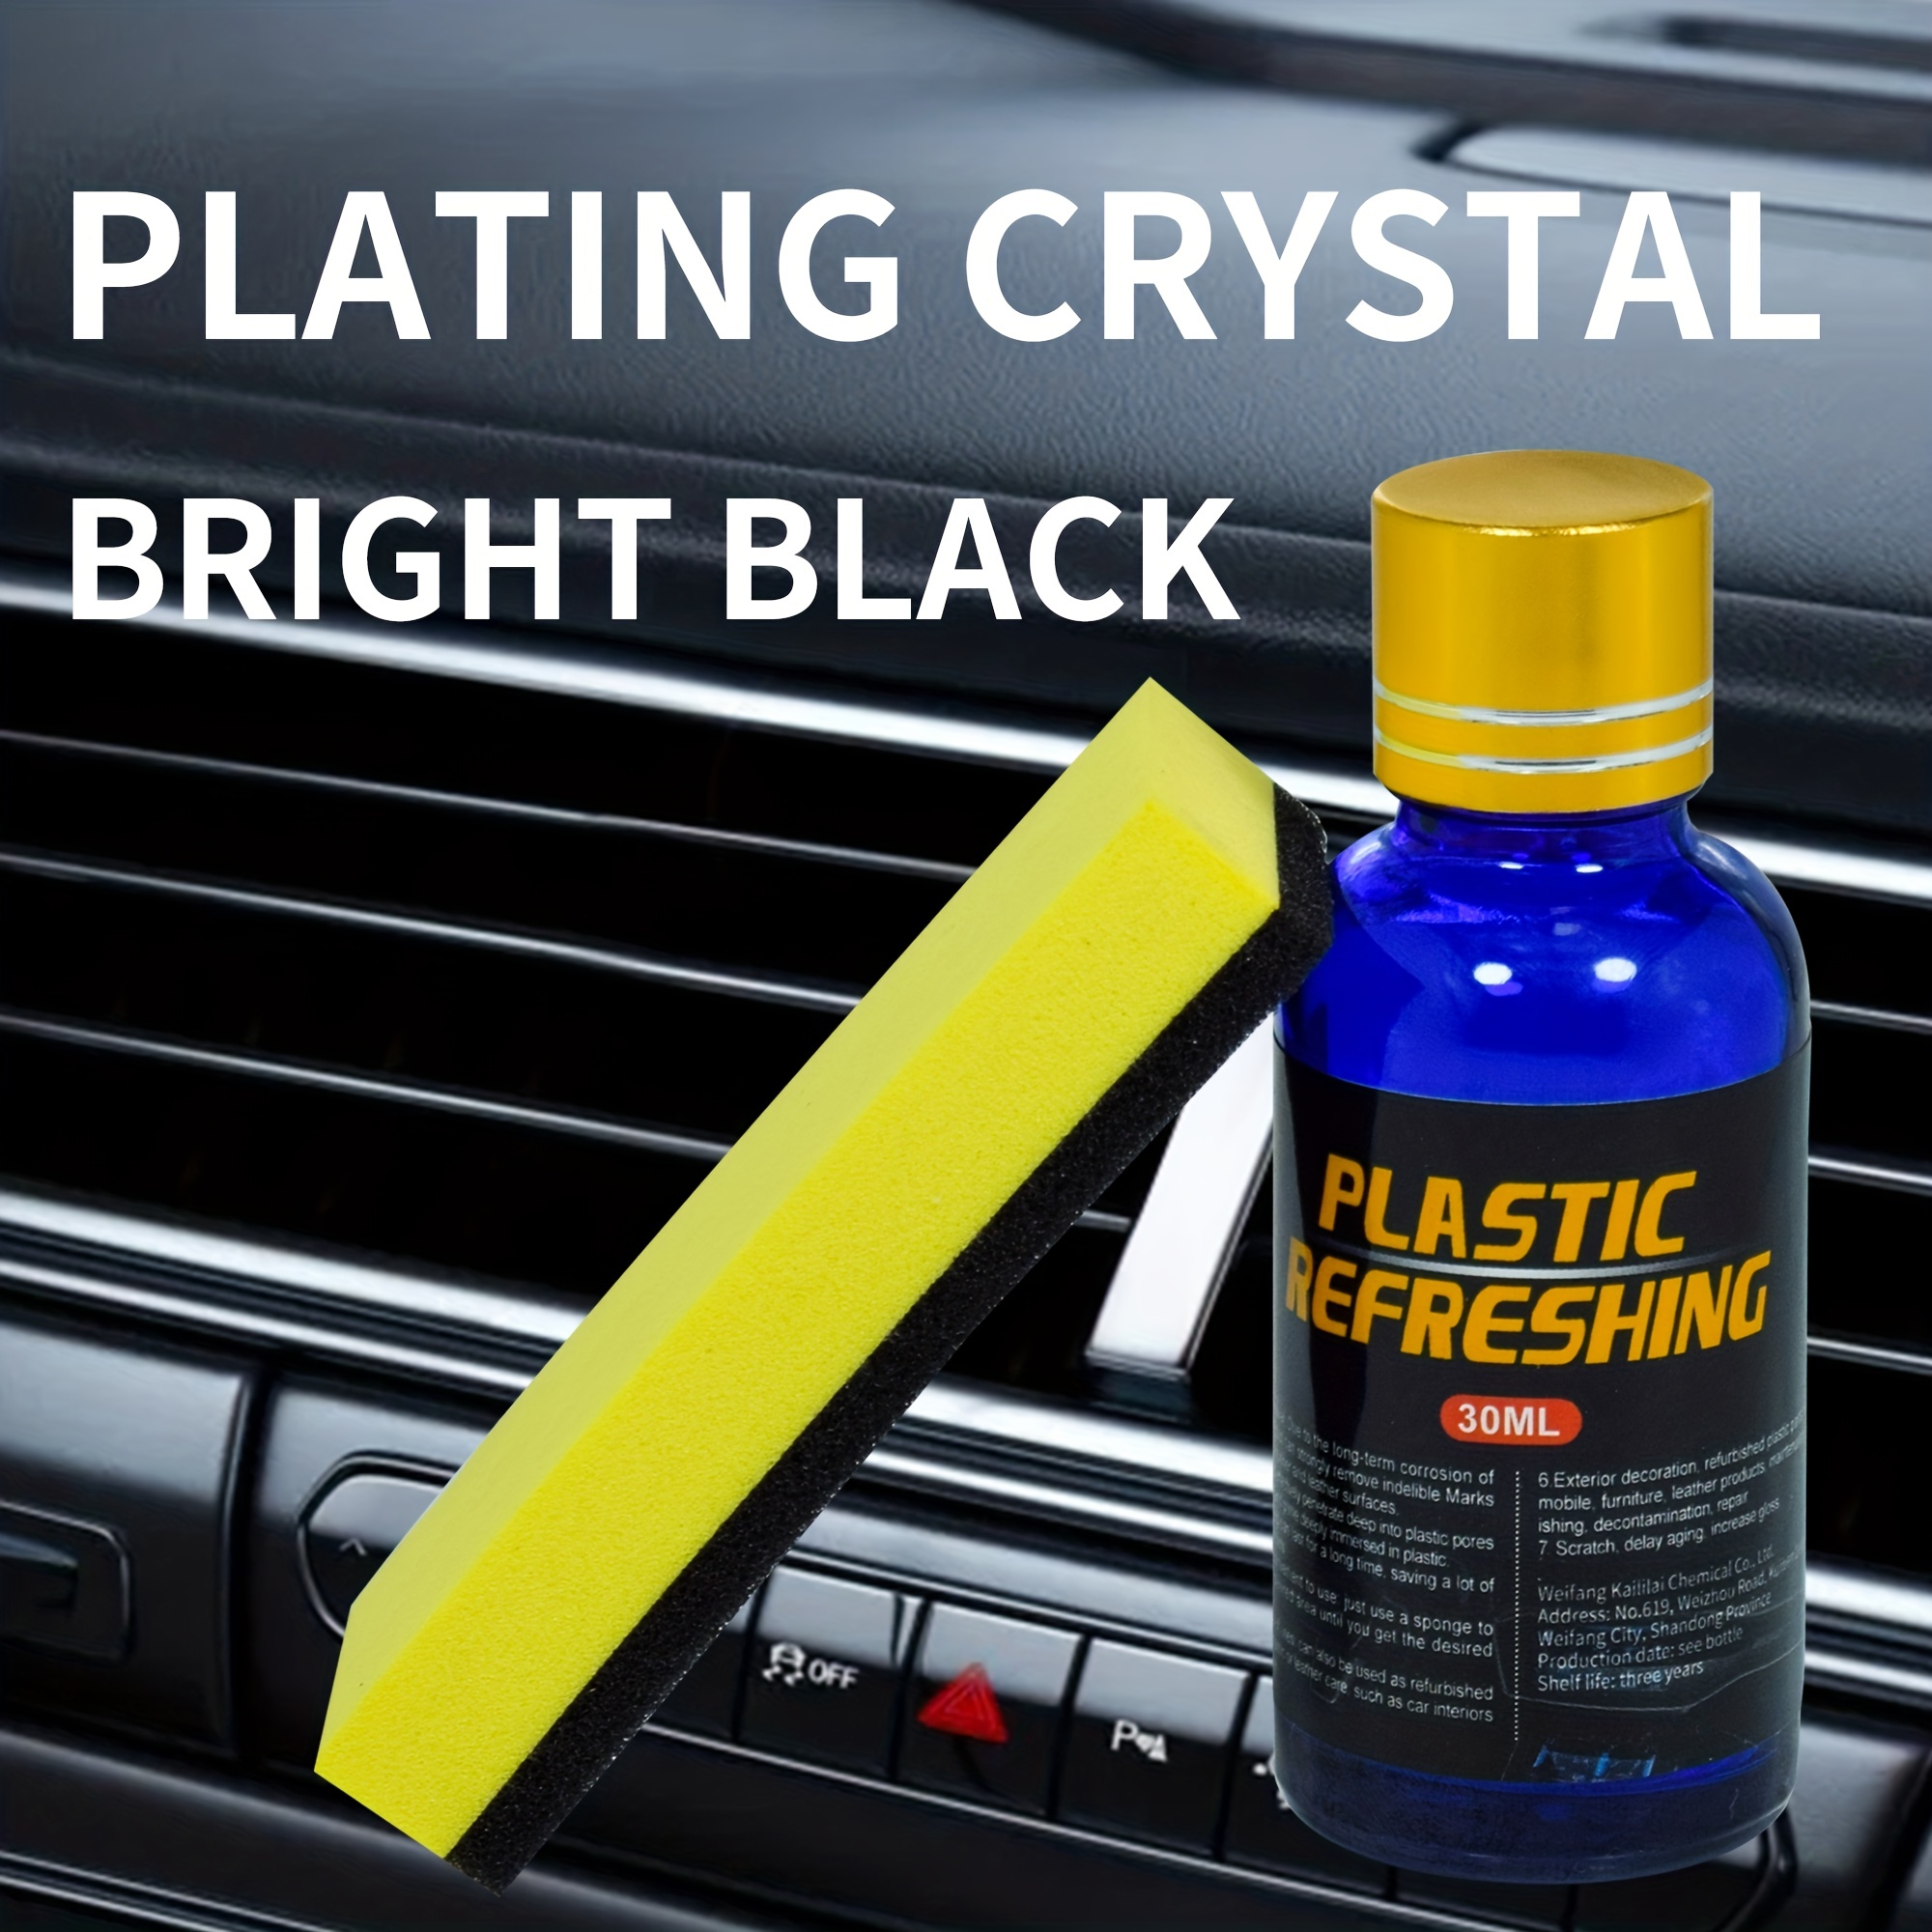 Leather Cleaner For Car Interior Car Refurbishment Cleaning Agent 500g  Leather Conditioner Automotive Interior Cleaner